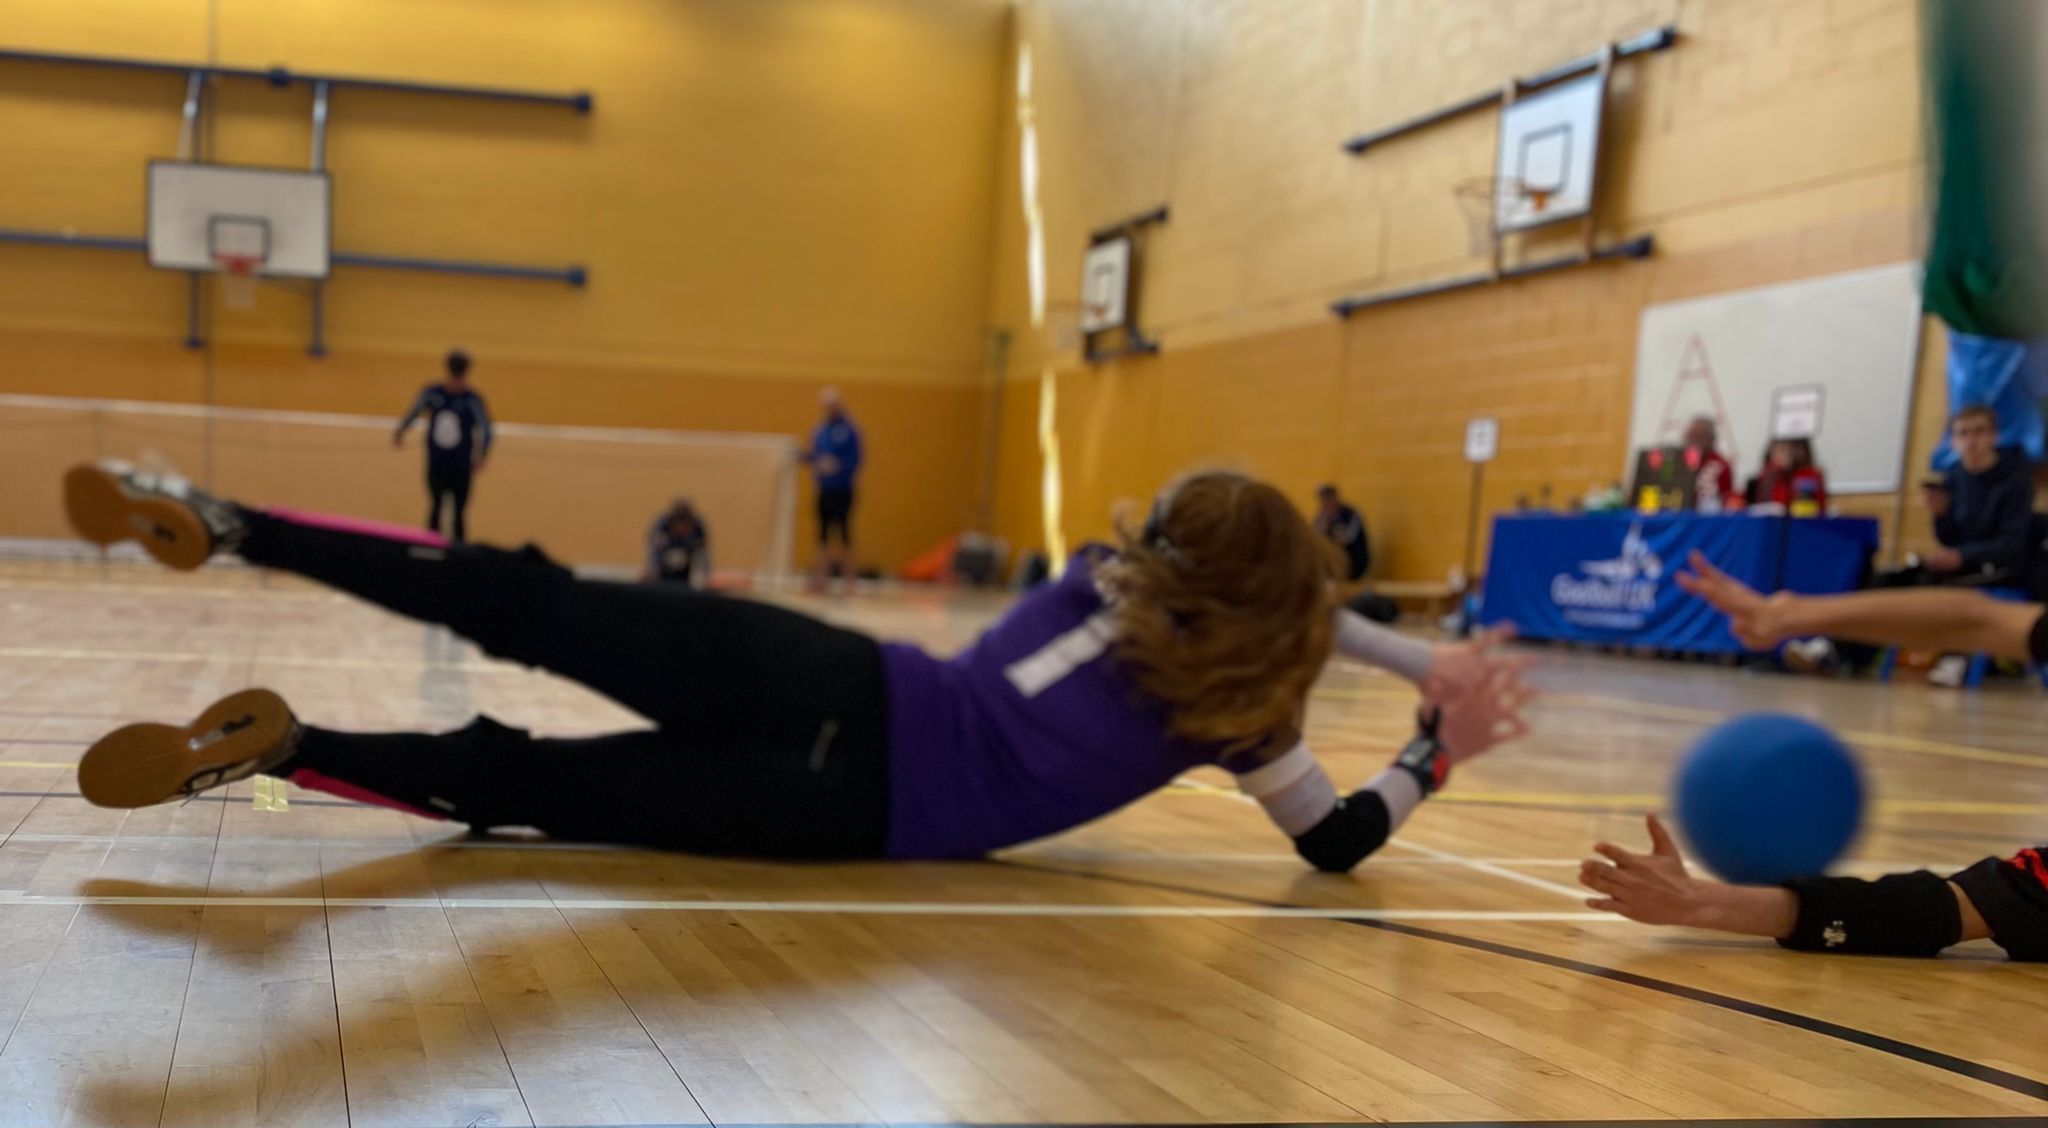 Chelsea Hudson of York St John diving out to the right whilst playing in centre to save the goalball. The right wing player has saved it with their hands in view in the photo.